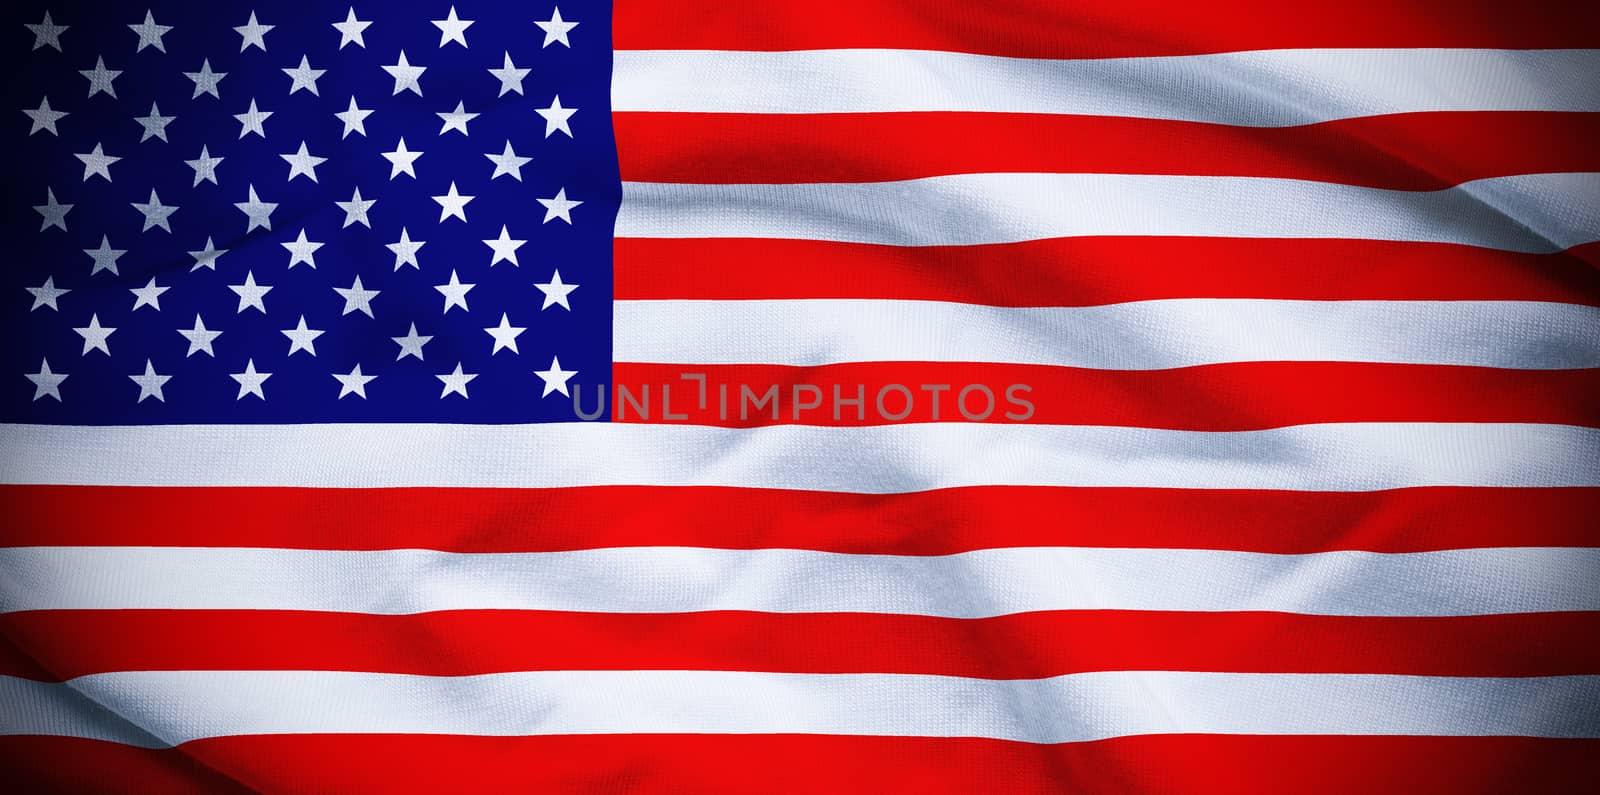 Wavy and rippled national flag of USA background.